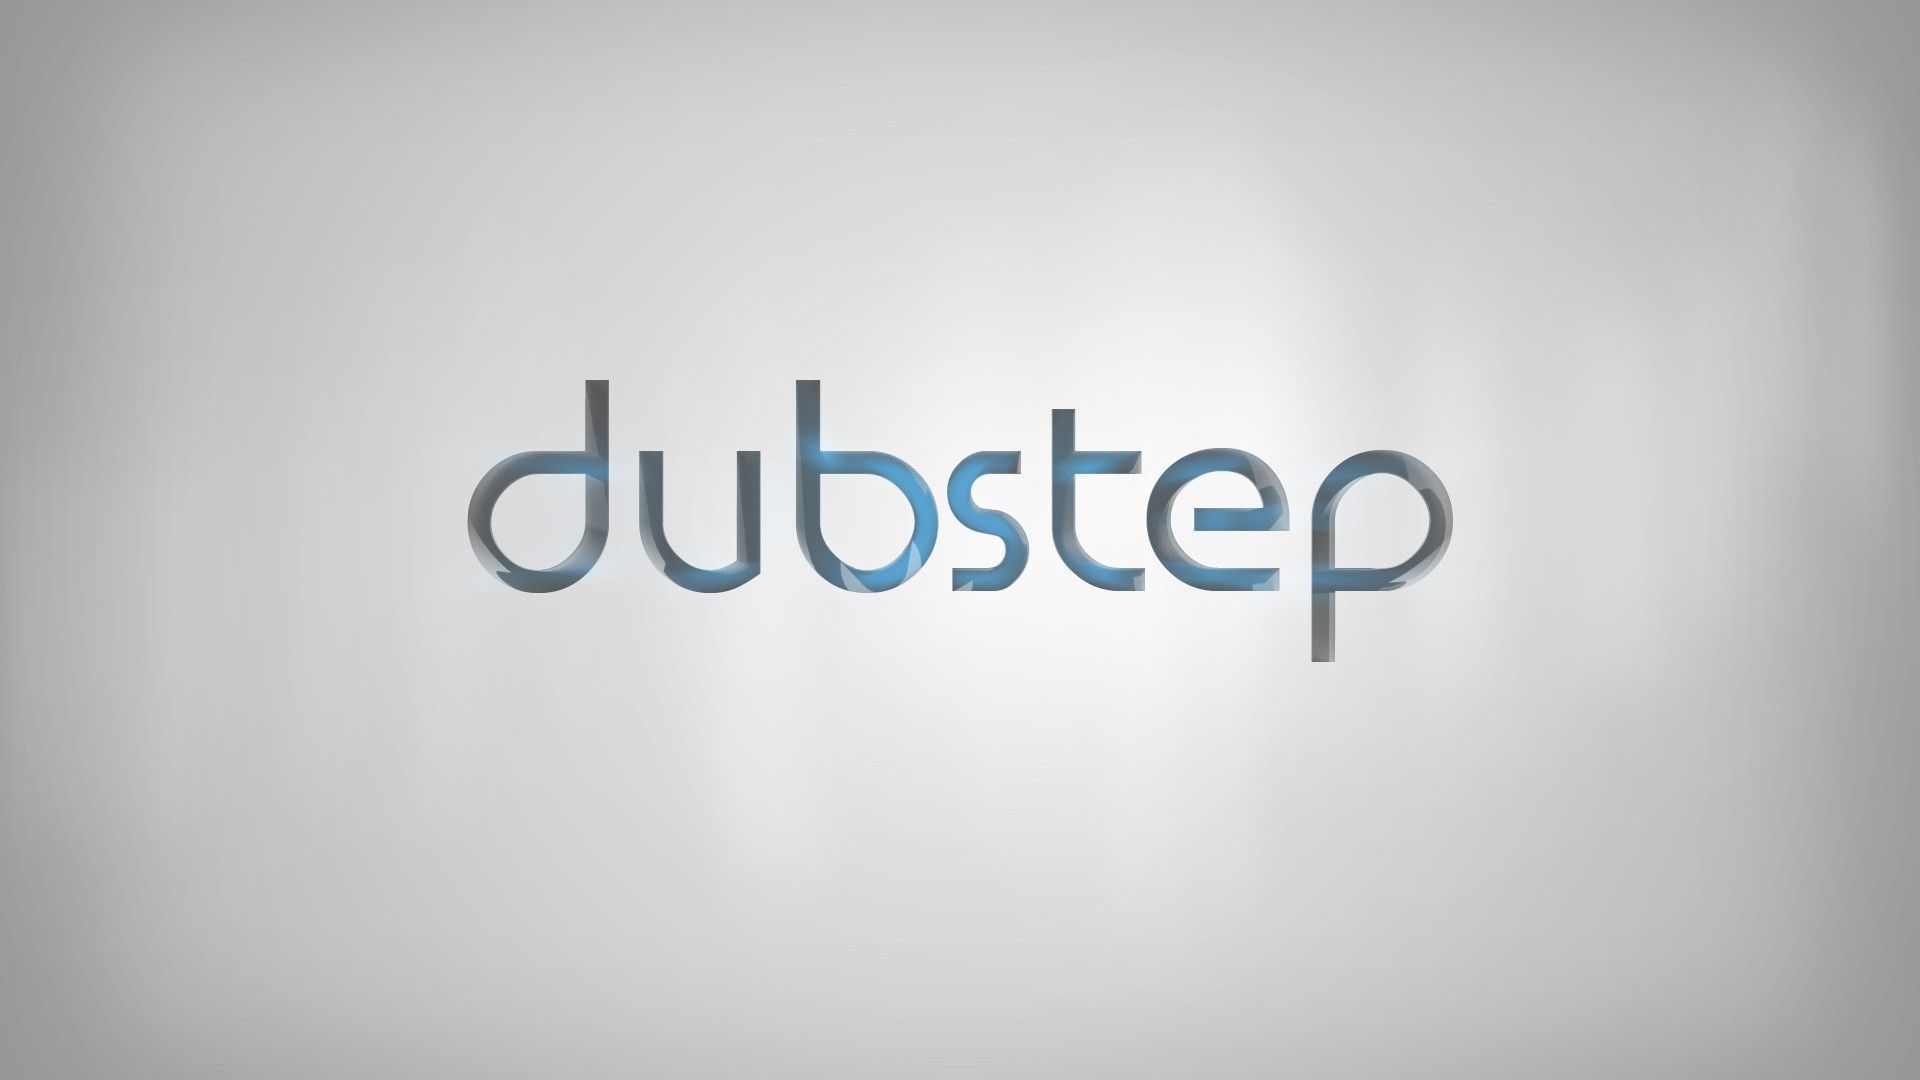 Download Dubstep Photos Wallpaper Gallery fhk9fe5f - Download